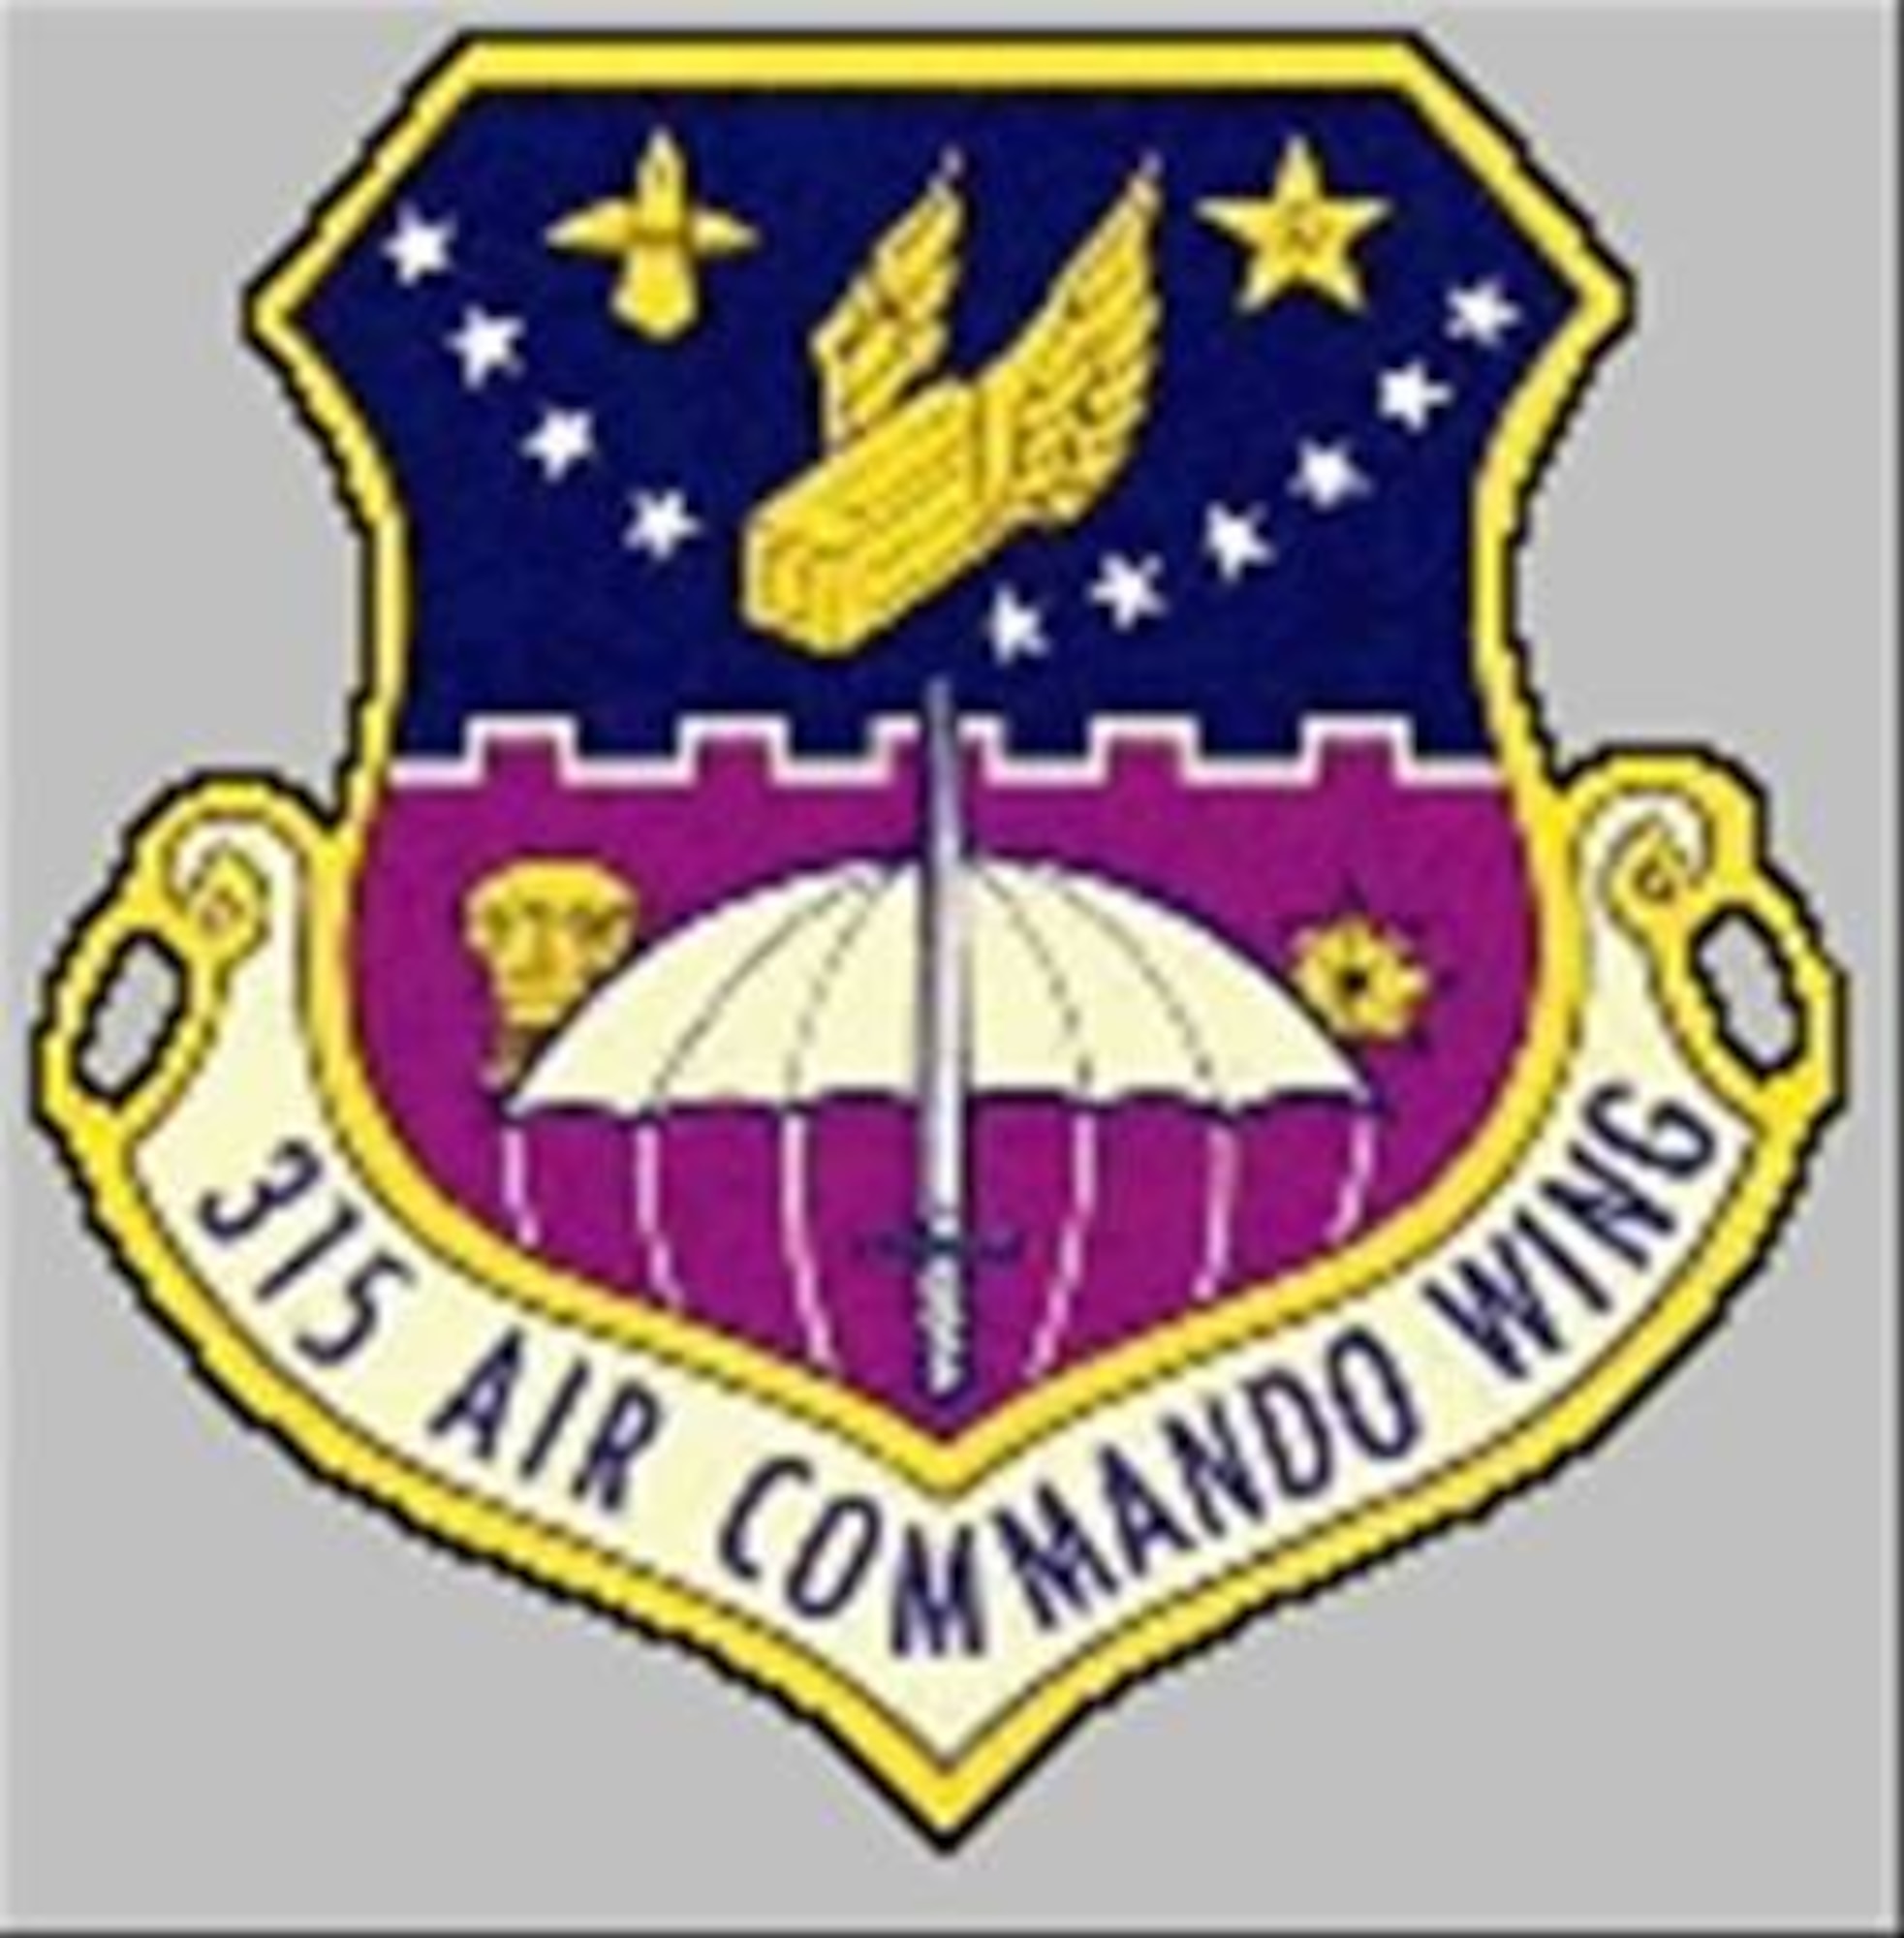 This the emblem that the 315 Air Commando Wing used from 1967 to 1968,  The 315 ACW was stationed at Phan Rang Air Base, South Vietnam from 1967 until the deactivation of the 3-1-5 in 1972. 